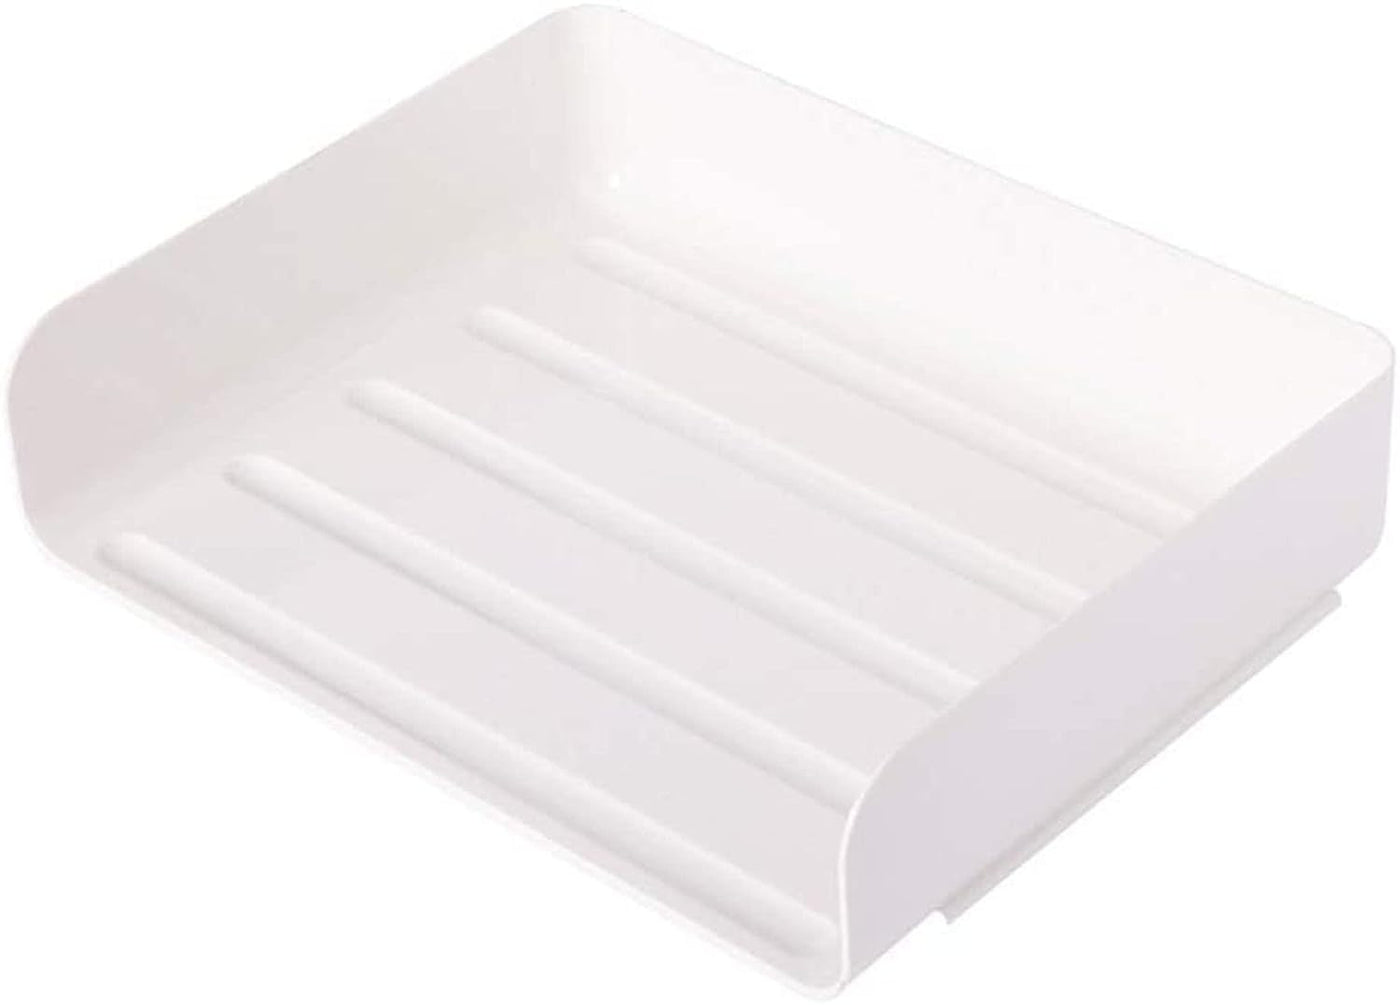 Pen Holder A4 File Tray